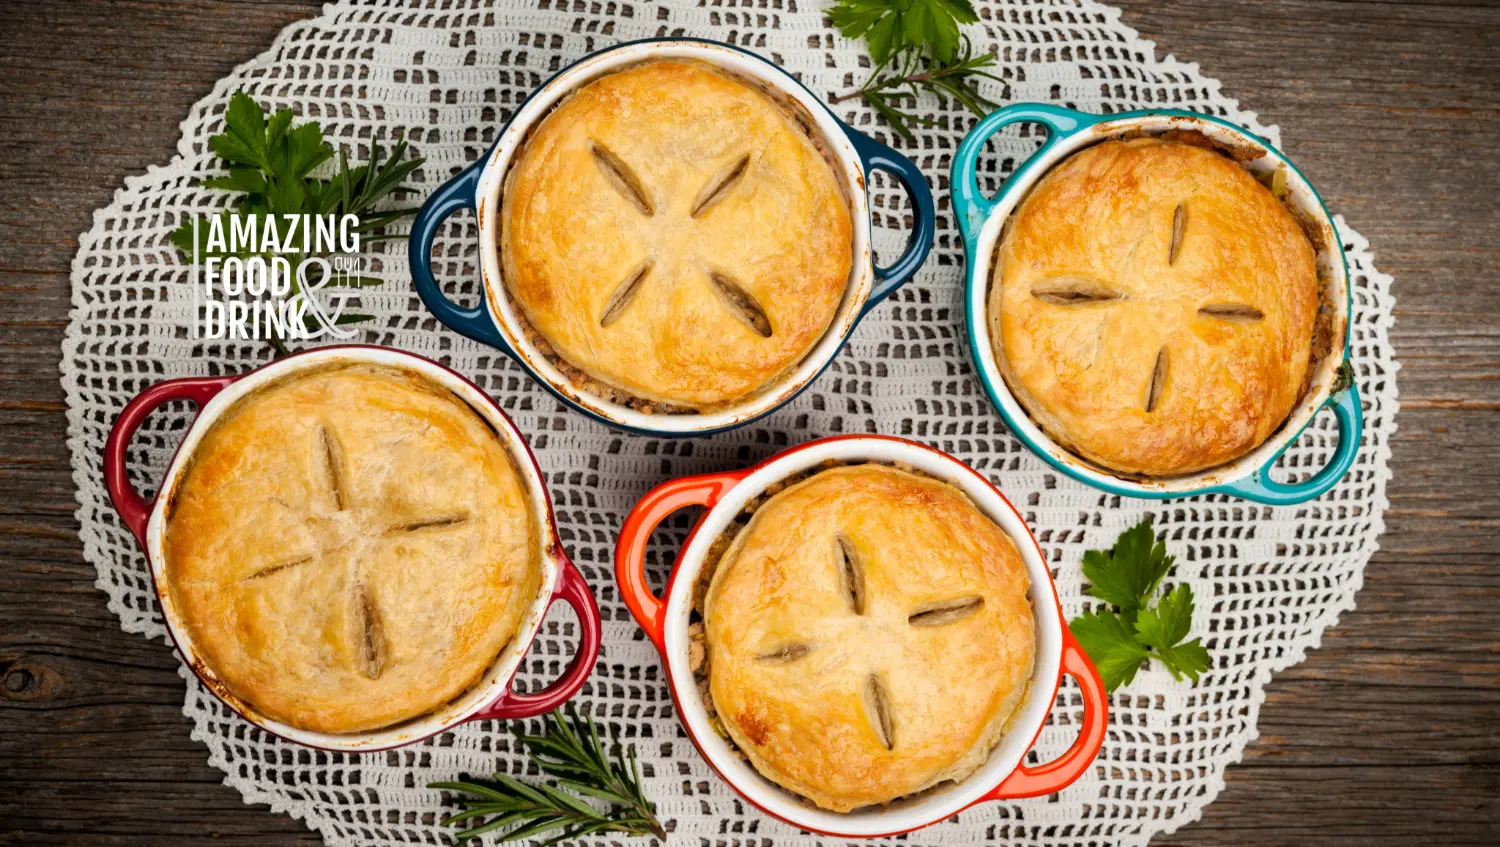 8 Delicious Savoury Pies From Around the World